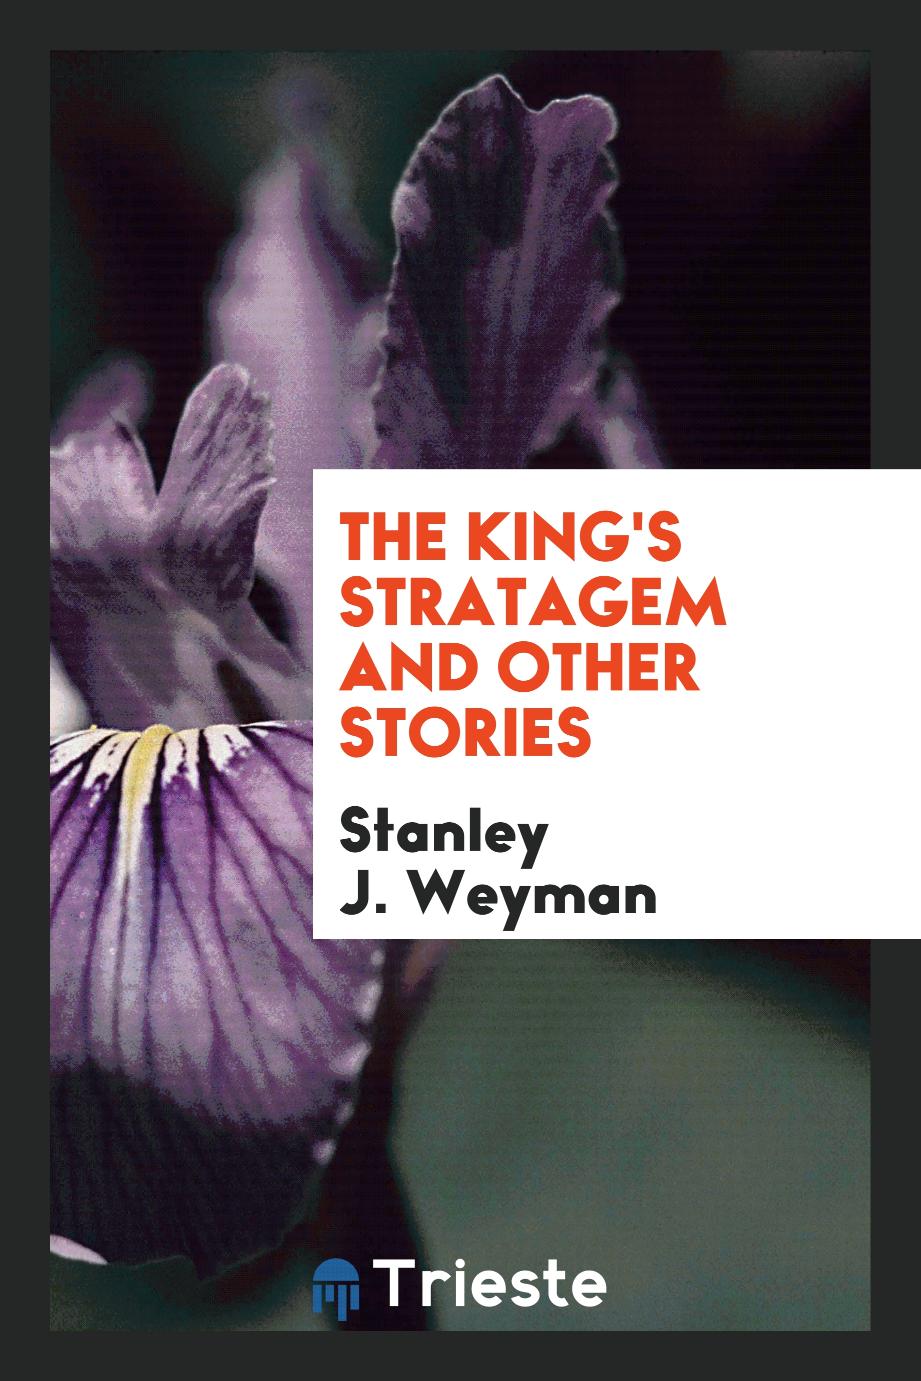 The King's Stratagem and Other Stories